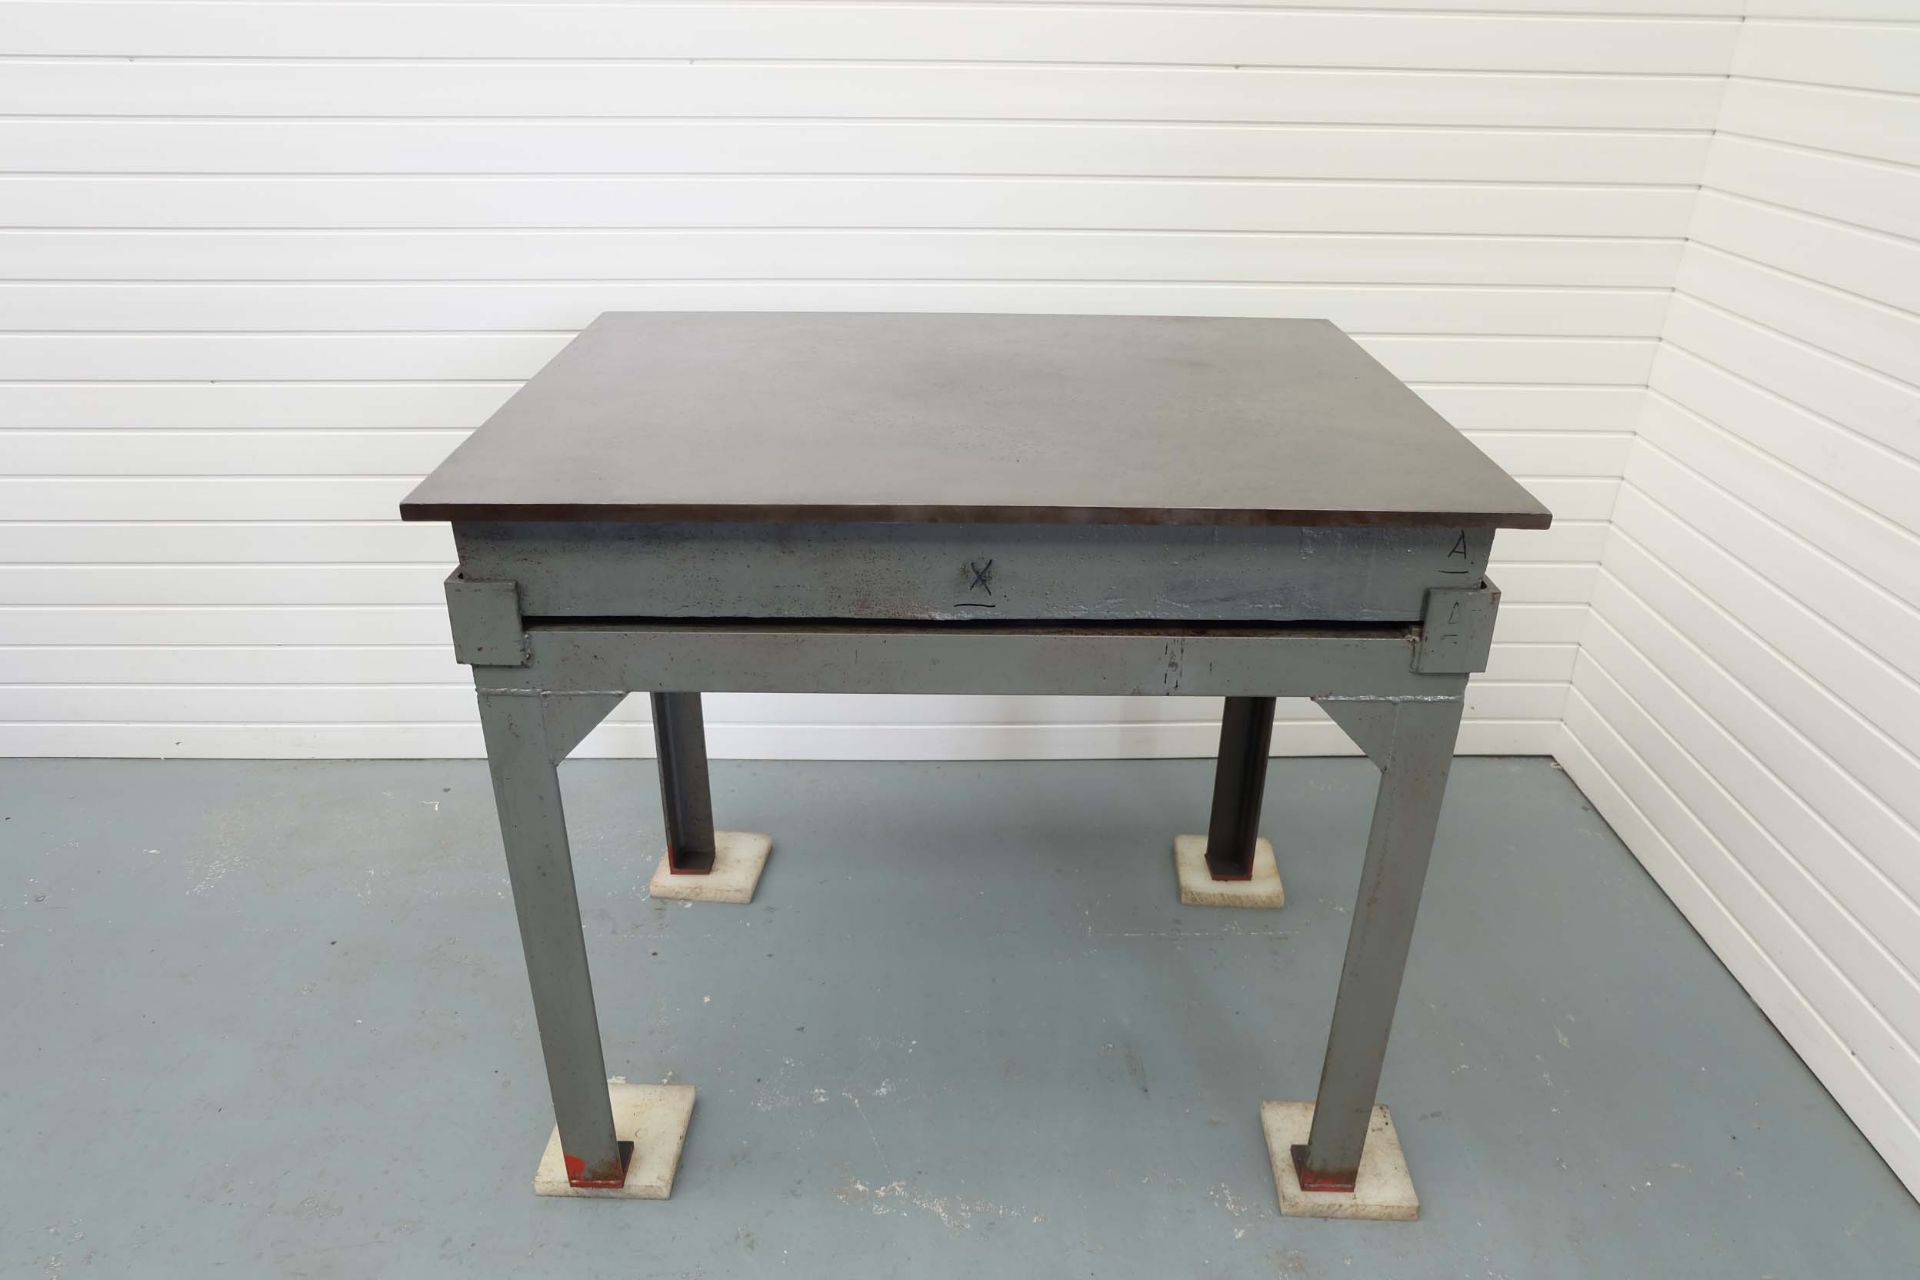 Cast Iron Surface Table On Steel Stand. Size: 48" x 36". Surface Height: 42".